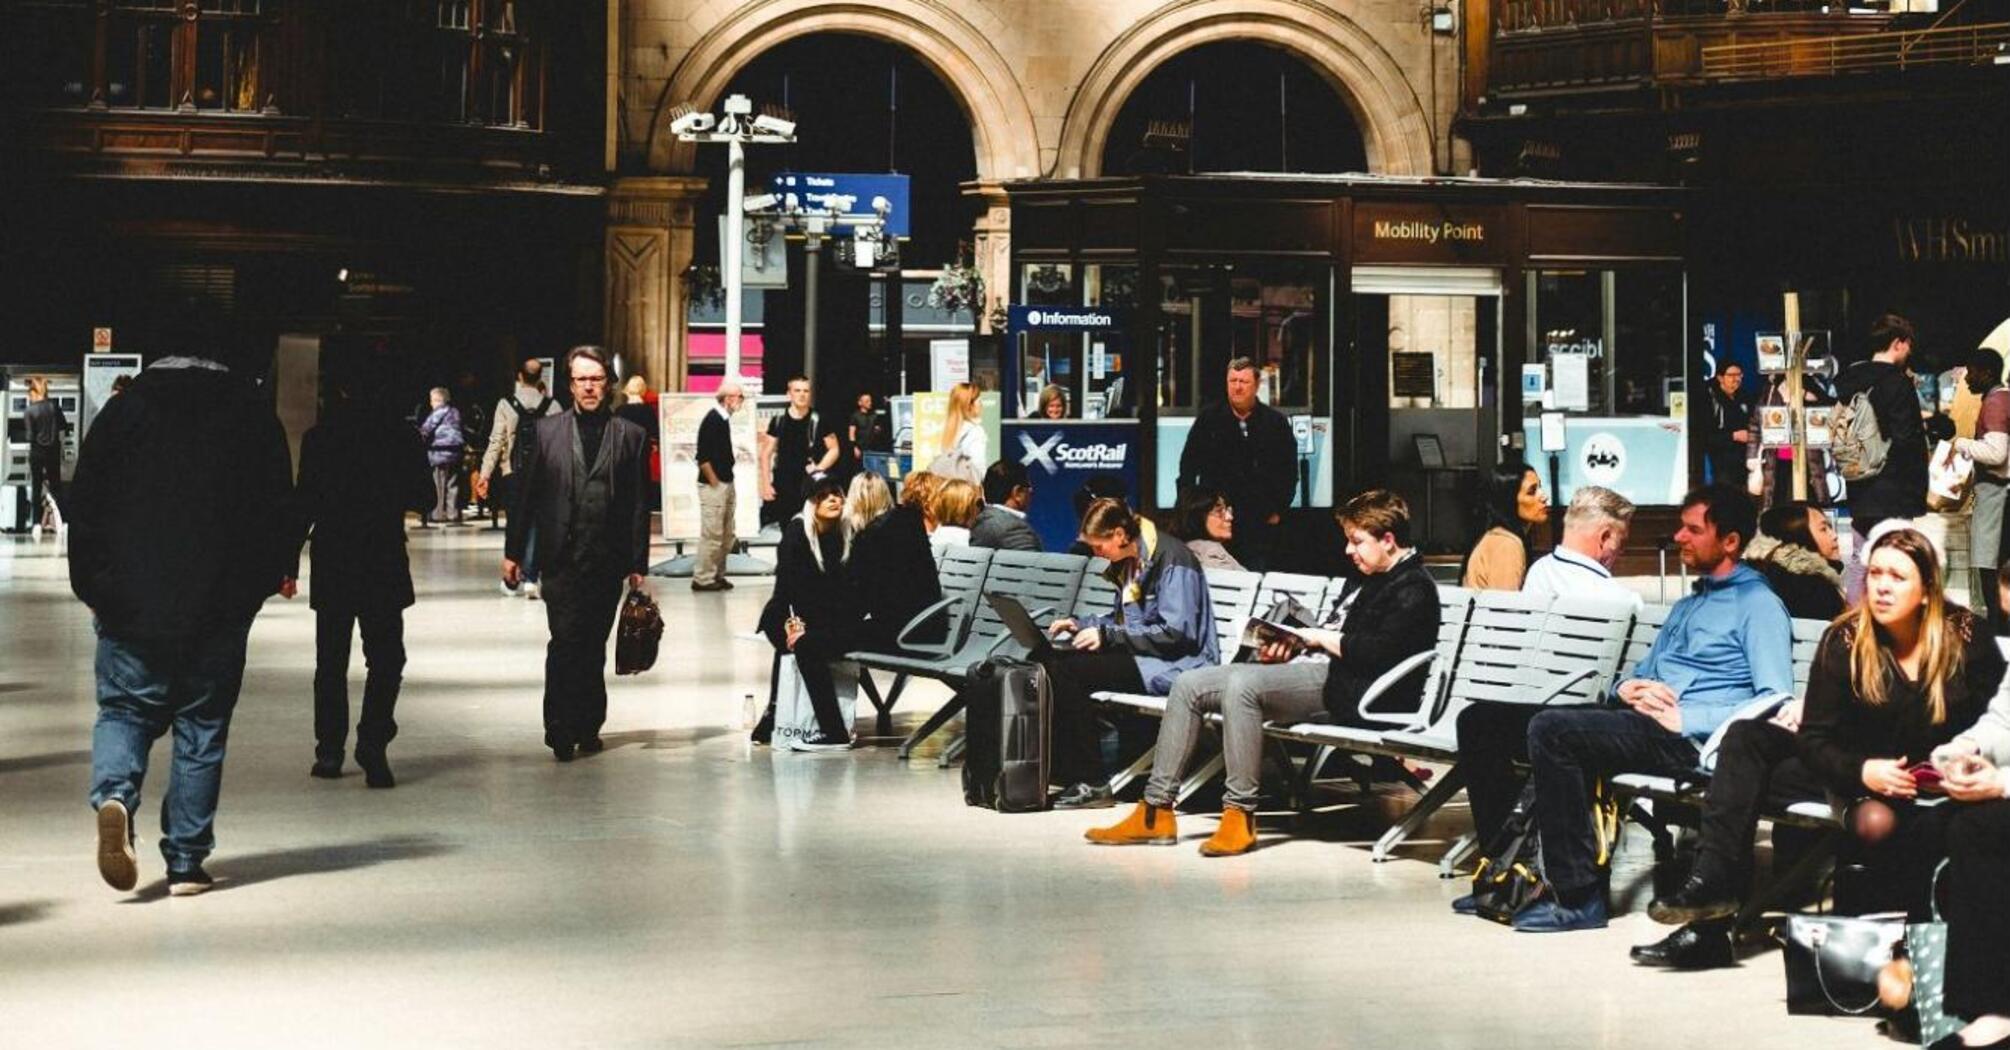 Interior of Glasgow Central Station with passengers waiting and walking